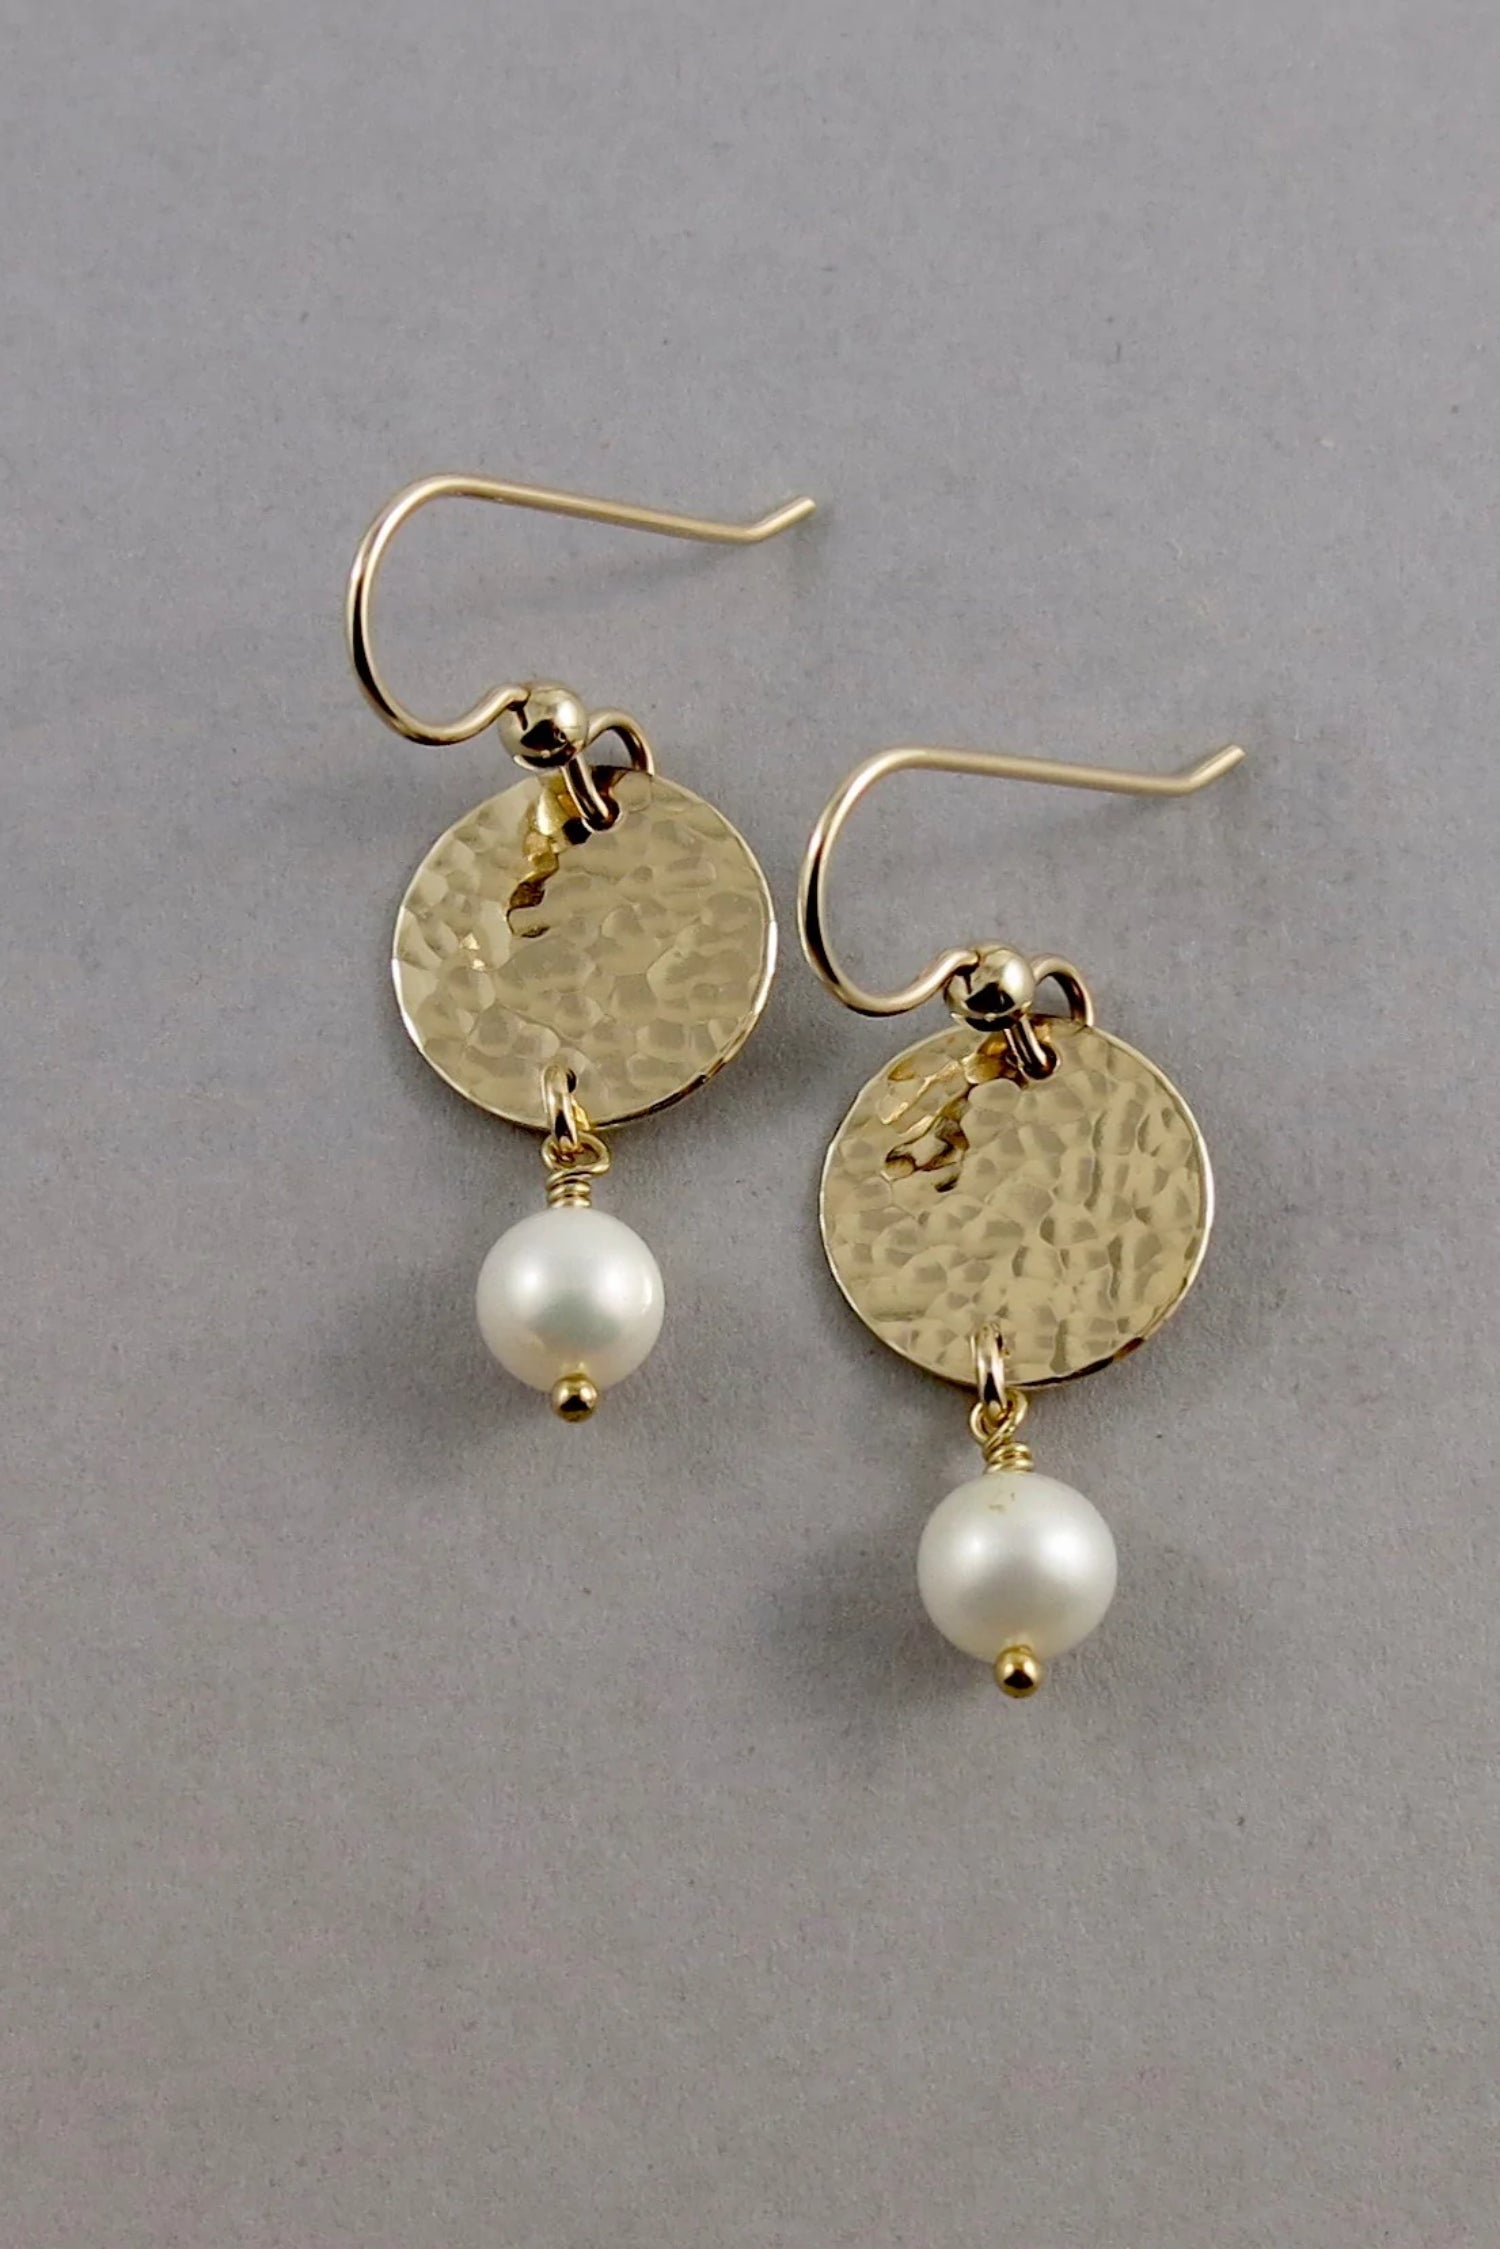 Pearl Moondrop Earrings - White Freshwater Pearls and 14k gold-fill by Mikel Grant, made in Sechelt BC